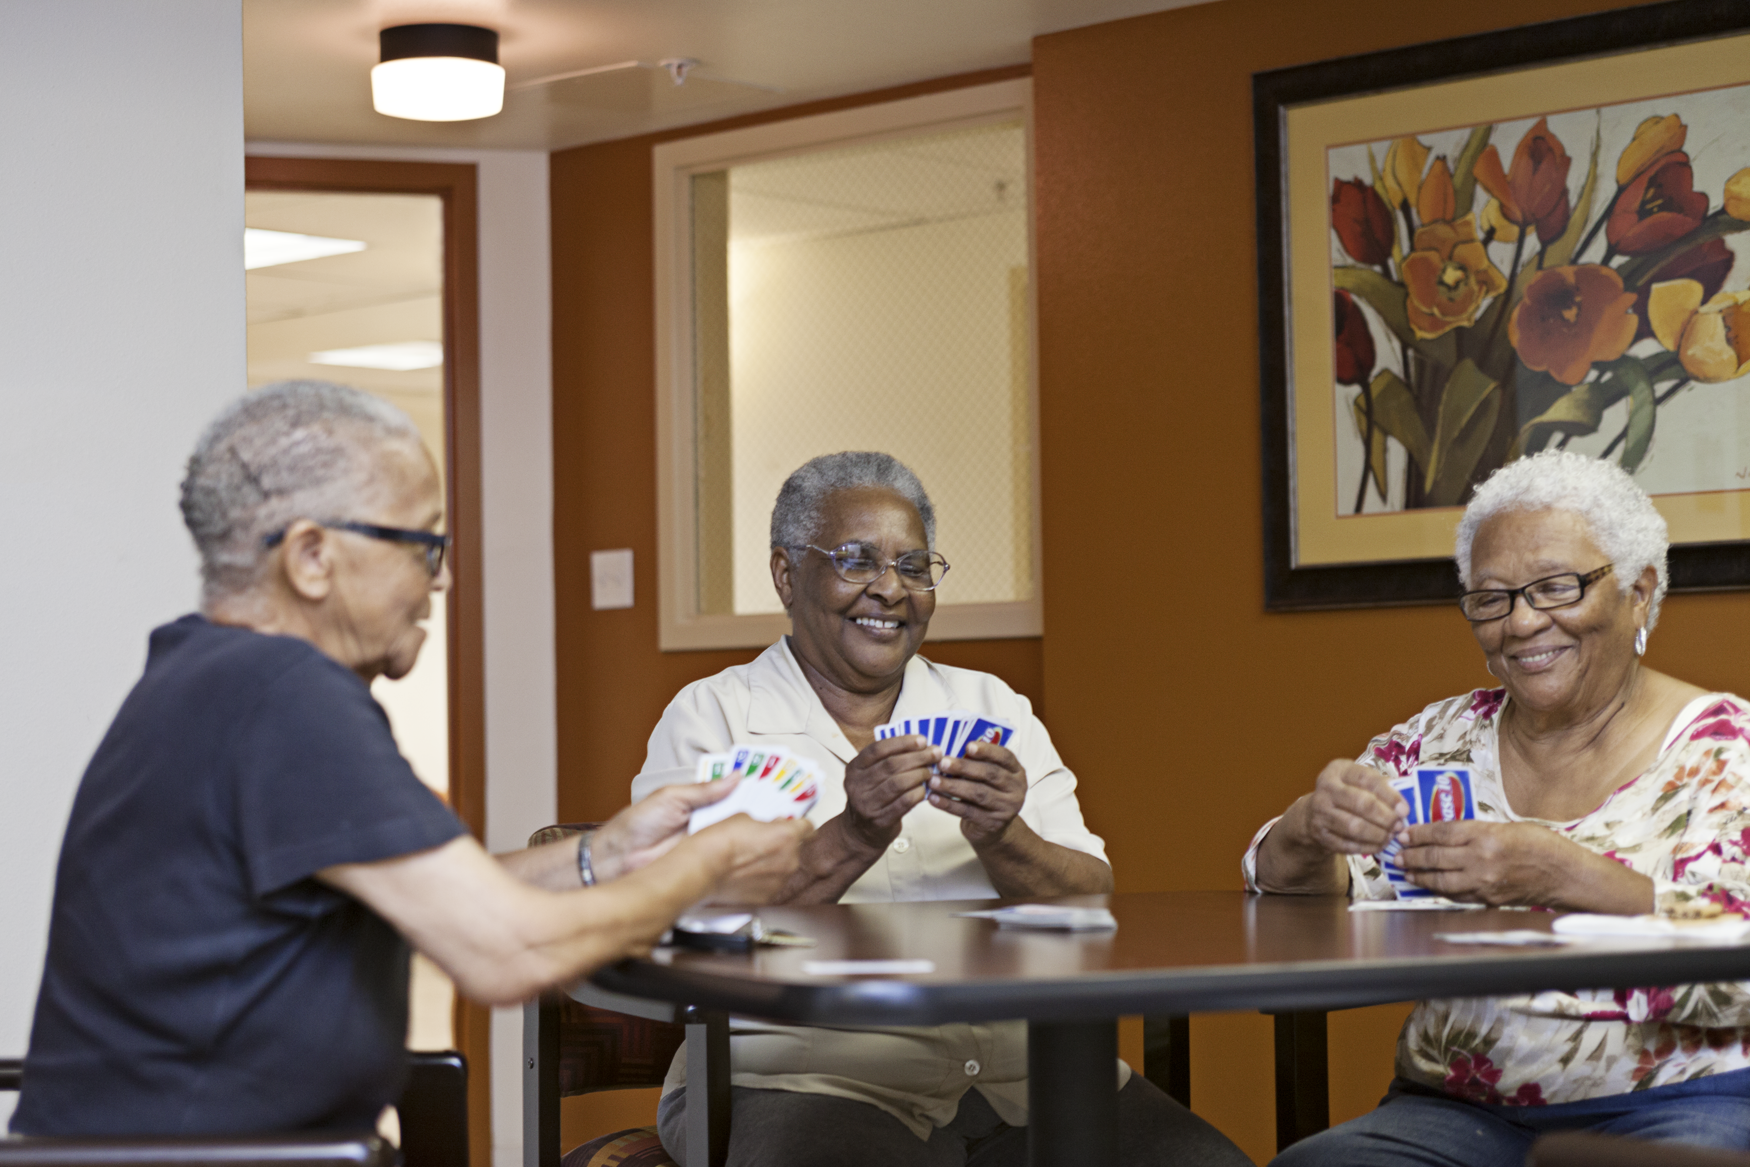    Existing stock images featuring multiple older adults predominantly depict romantic partnership. Participants wanted to portray other forms of companionship that are central to their experiences of senior life. Several participants play cards, and